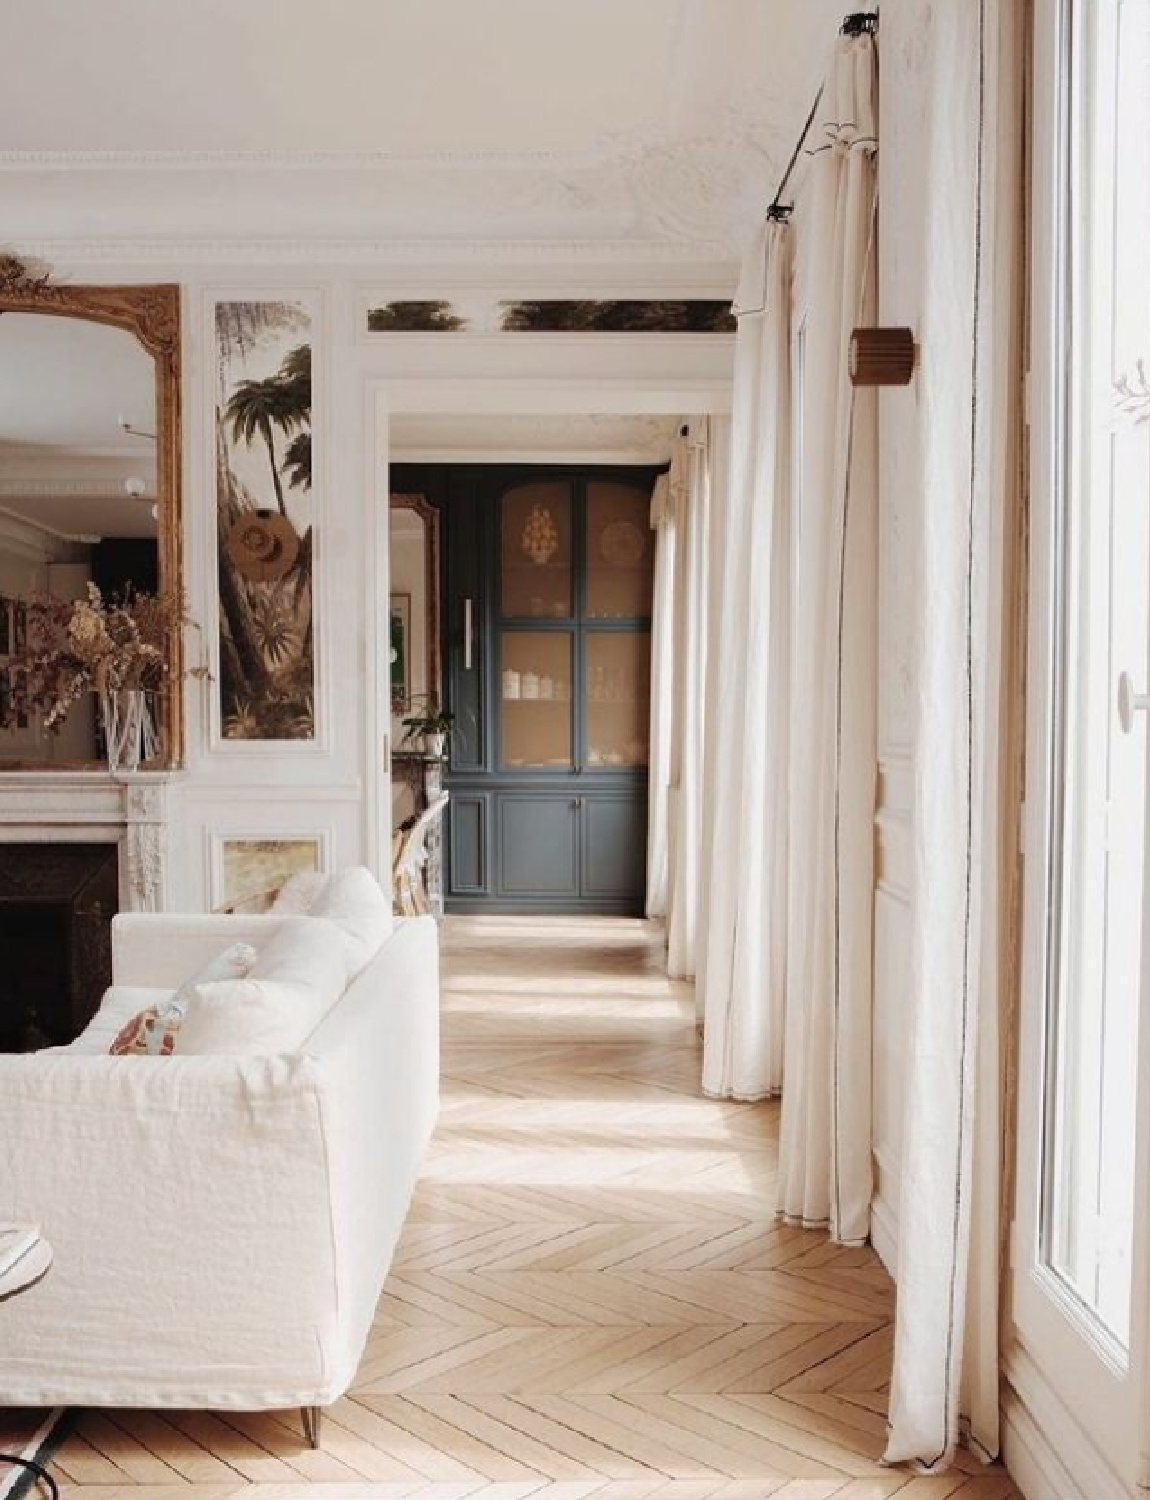 Herringbone wood flooring in an elegant French home with classic architecture - photo by Benjamin Colombel.